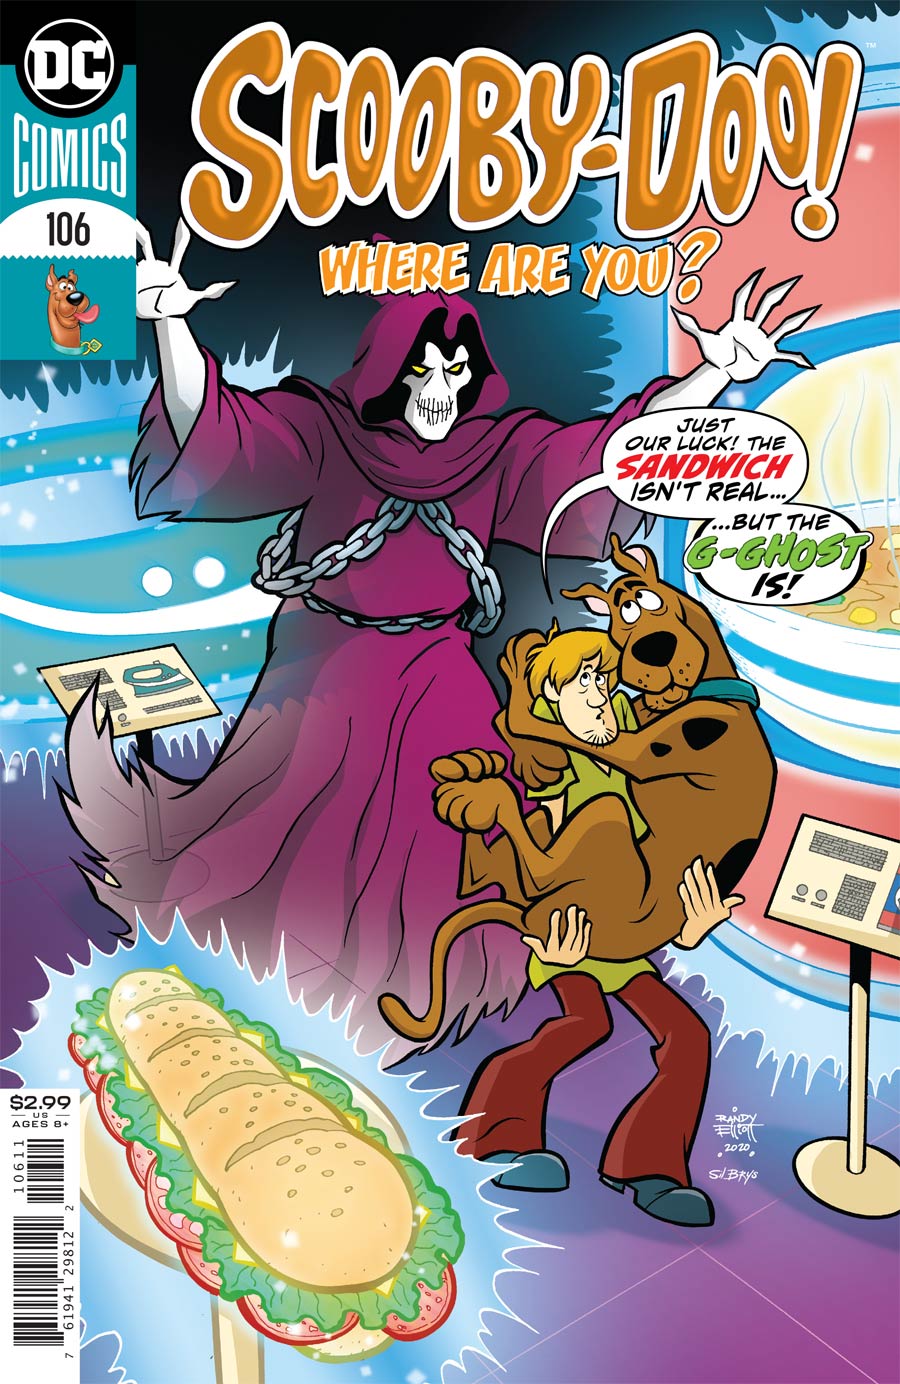 Scooby-Doo, Where Are You? #106 (2020)